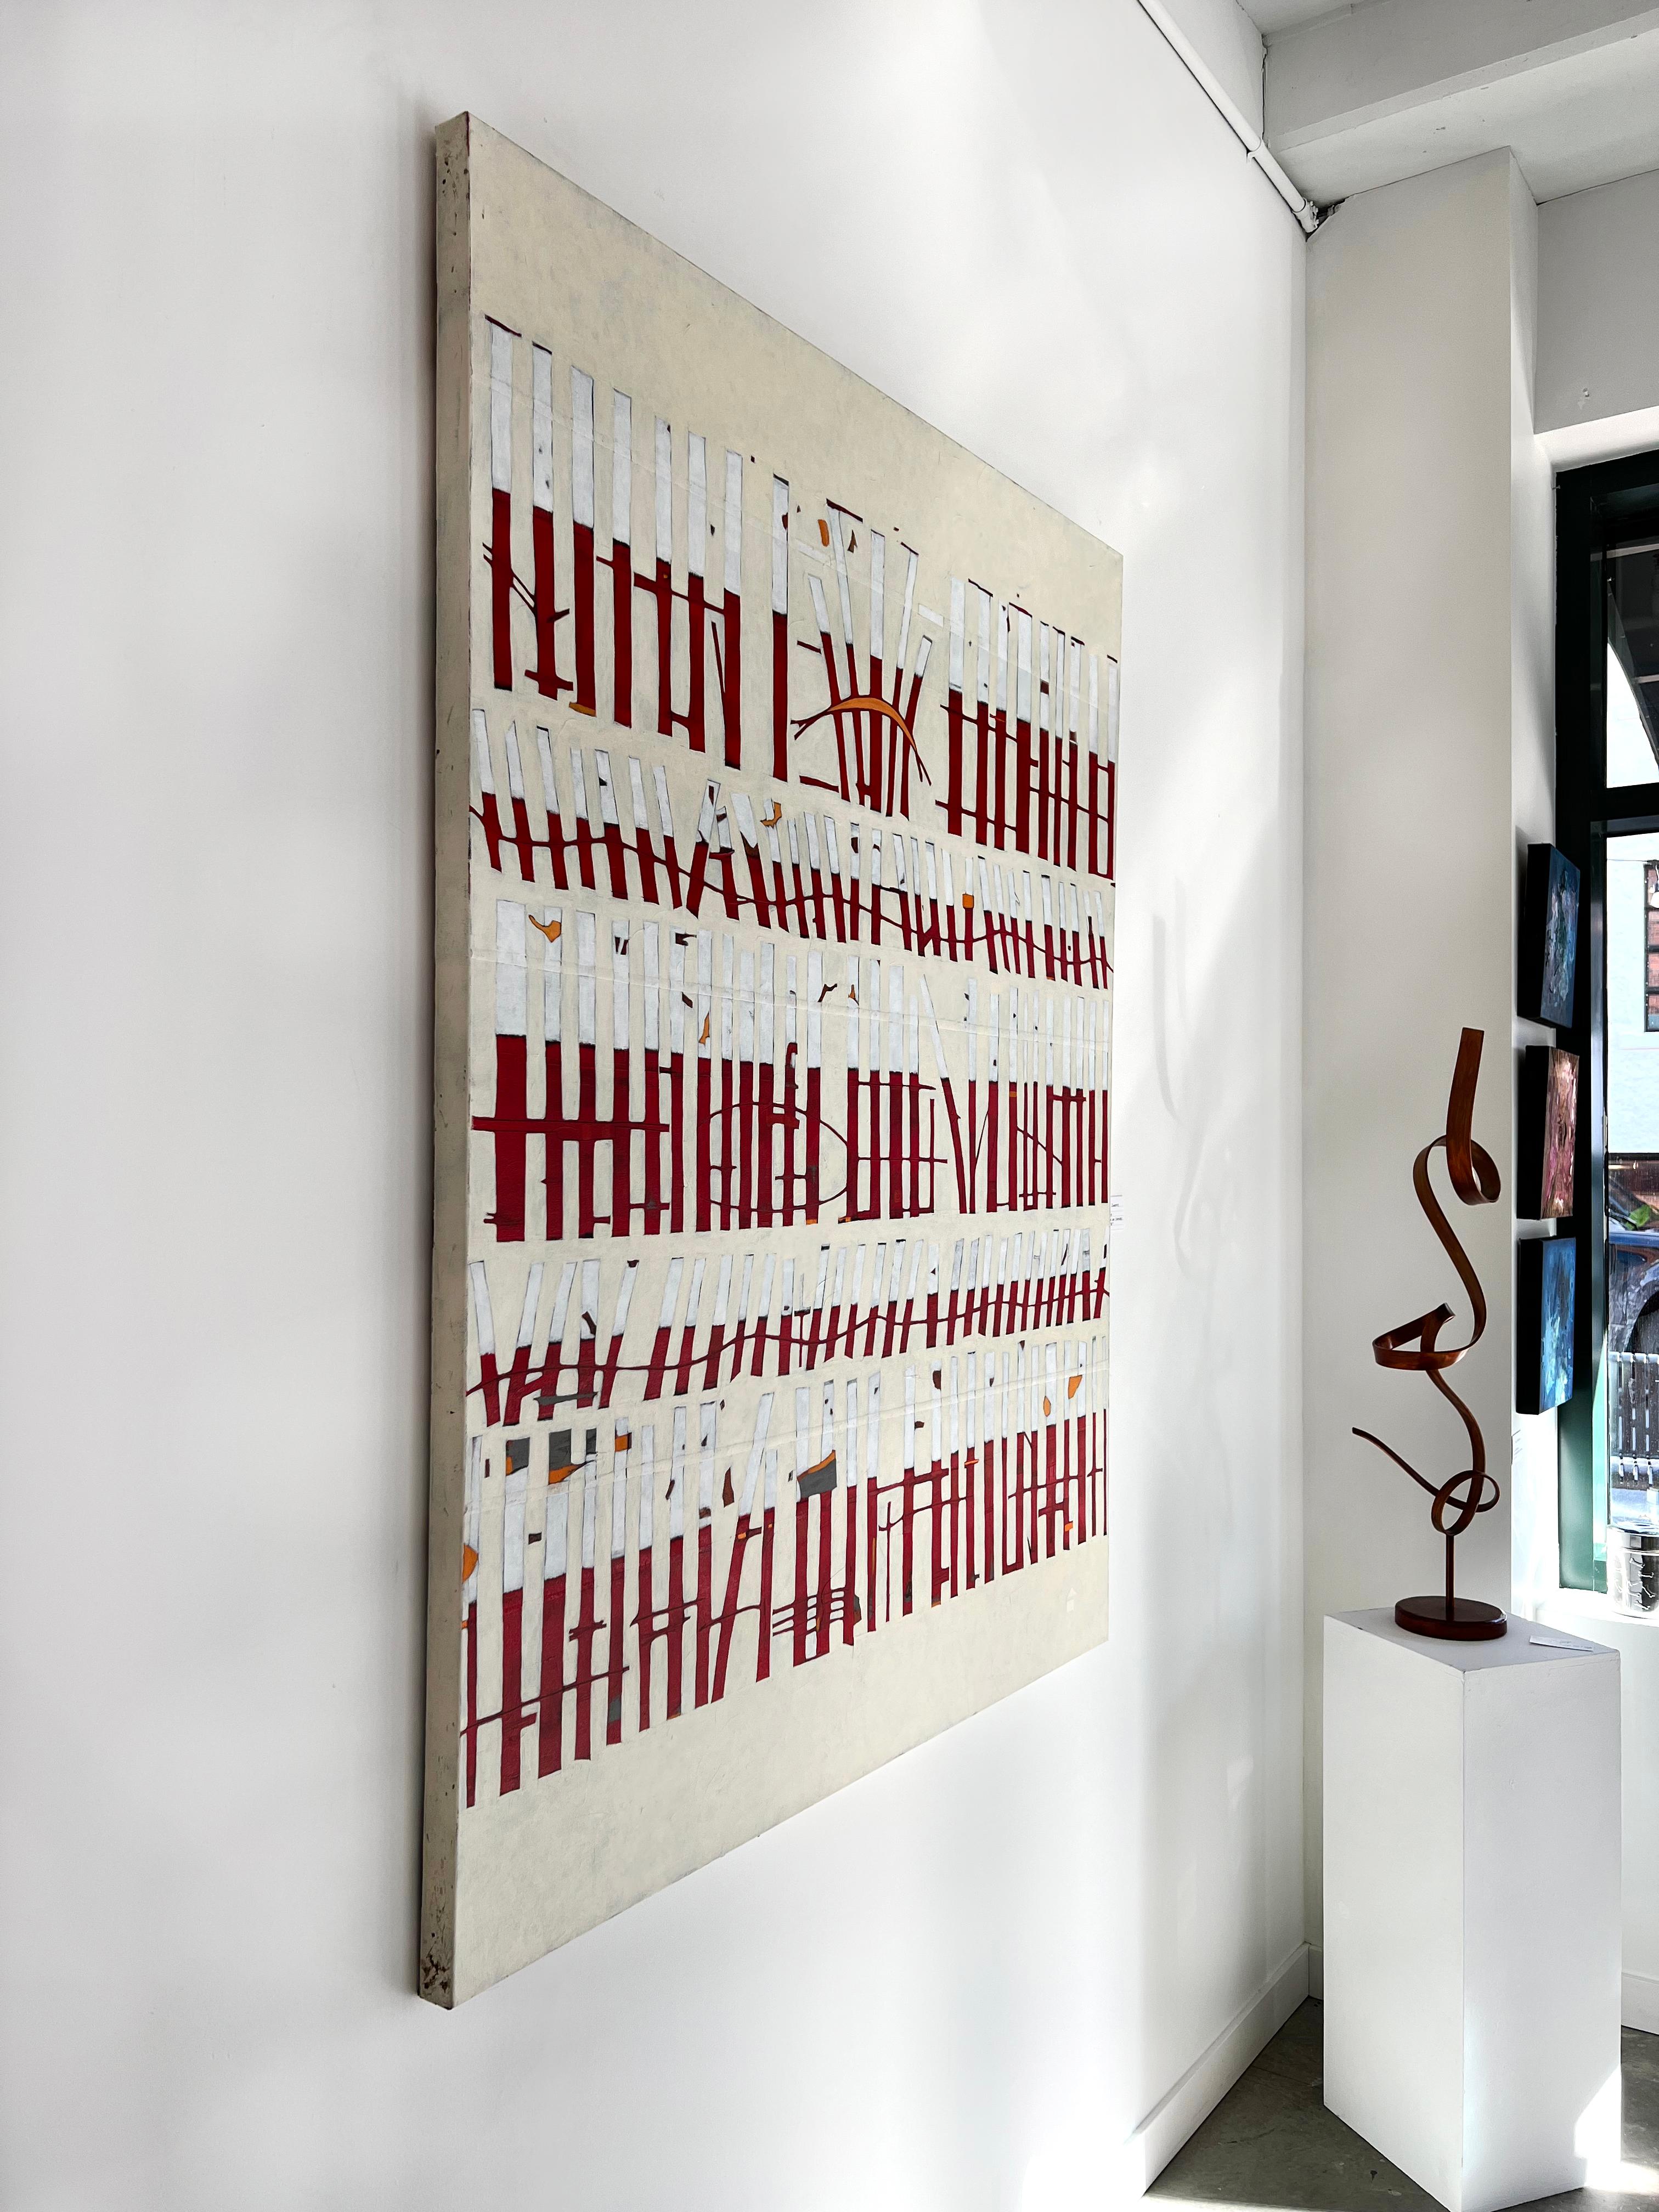 This large abstract painting by Sofie Swann is made with acrylic paint on gallery wrapped canvas. It features thin, imperfect vertical rectangular shapes which are half white and half deep red, and are stacked horizontally next to one another - some